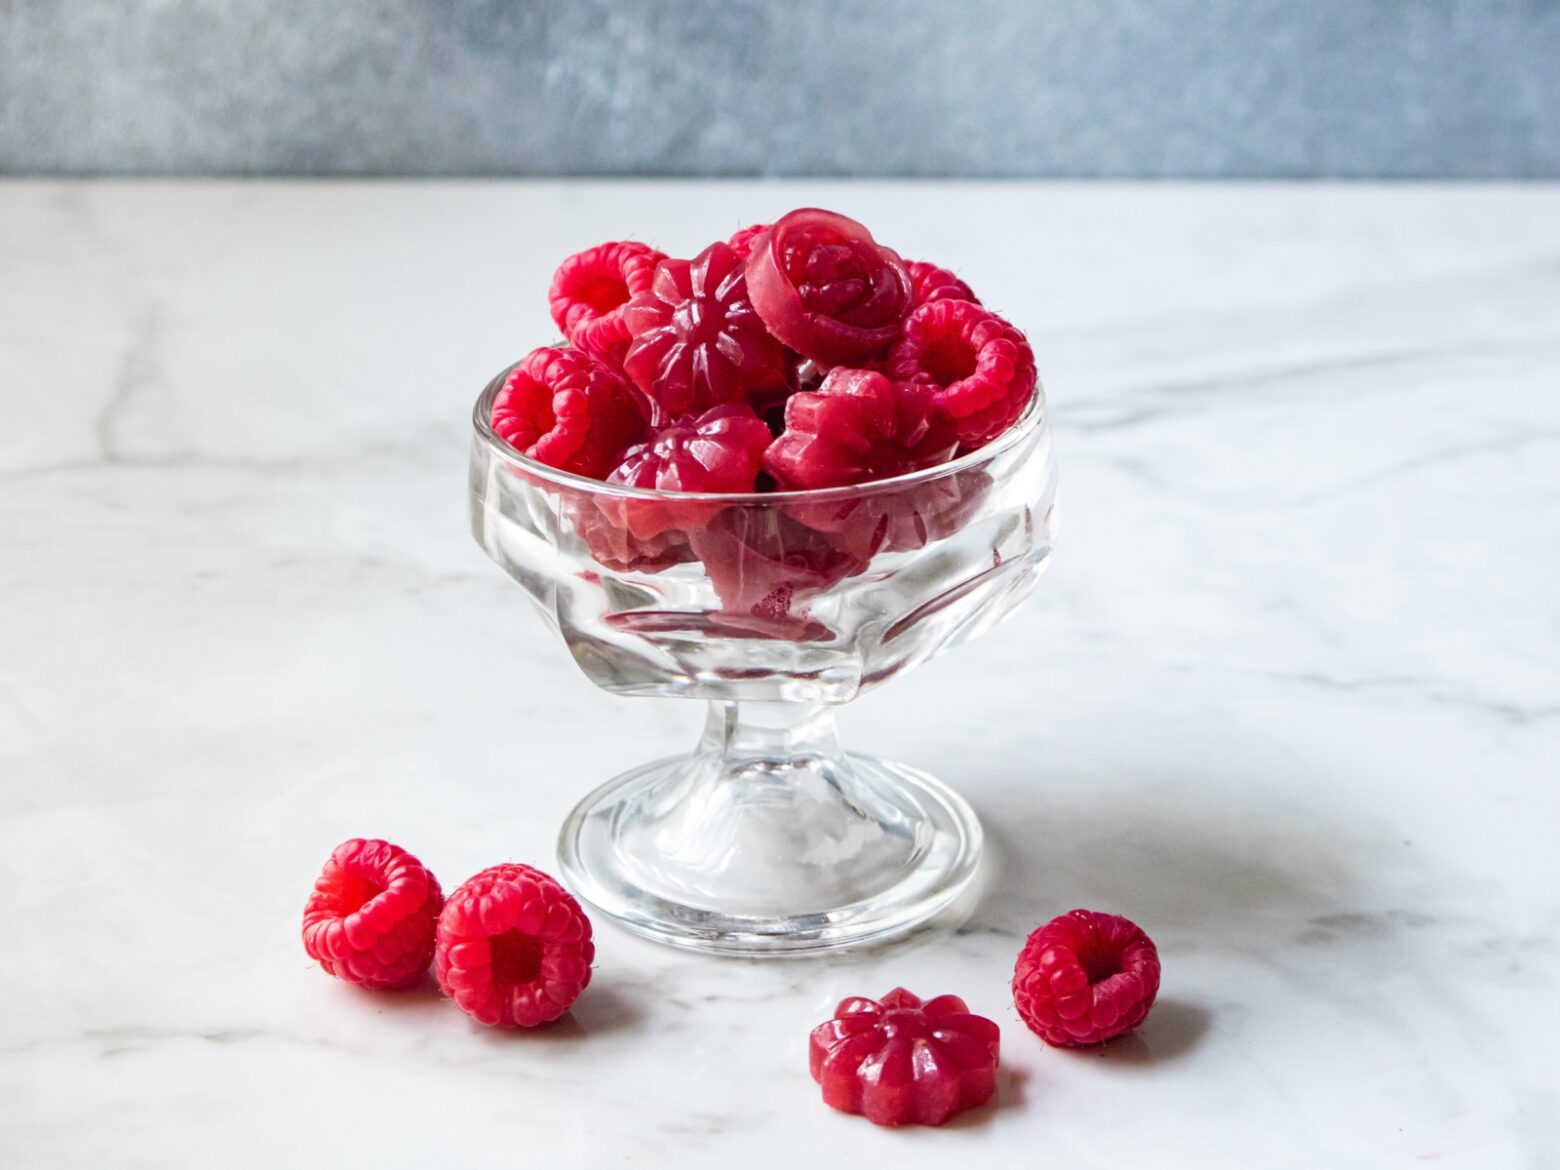 A small glass desert bowl filled with raspberries and pomegranate raspberry gummies, with three raspberries and one gummy on the white marble table next to the glass.